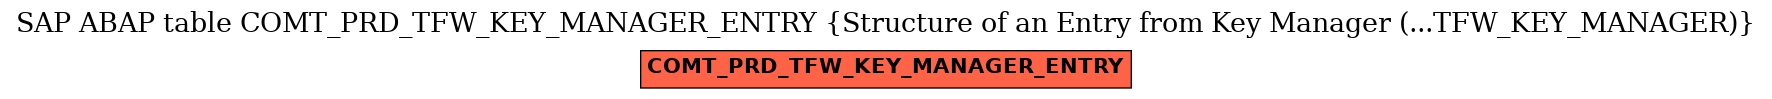 E-R Diagram for table COMT_PRD_TFW_KEY_MANAGER_ENTRY (Structure of an Entry from Key Manager (...TFW_KEY_MANAGER))